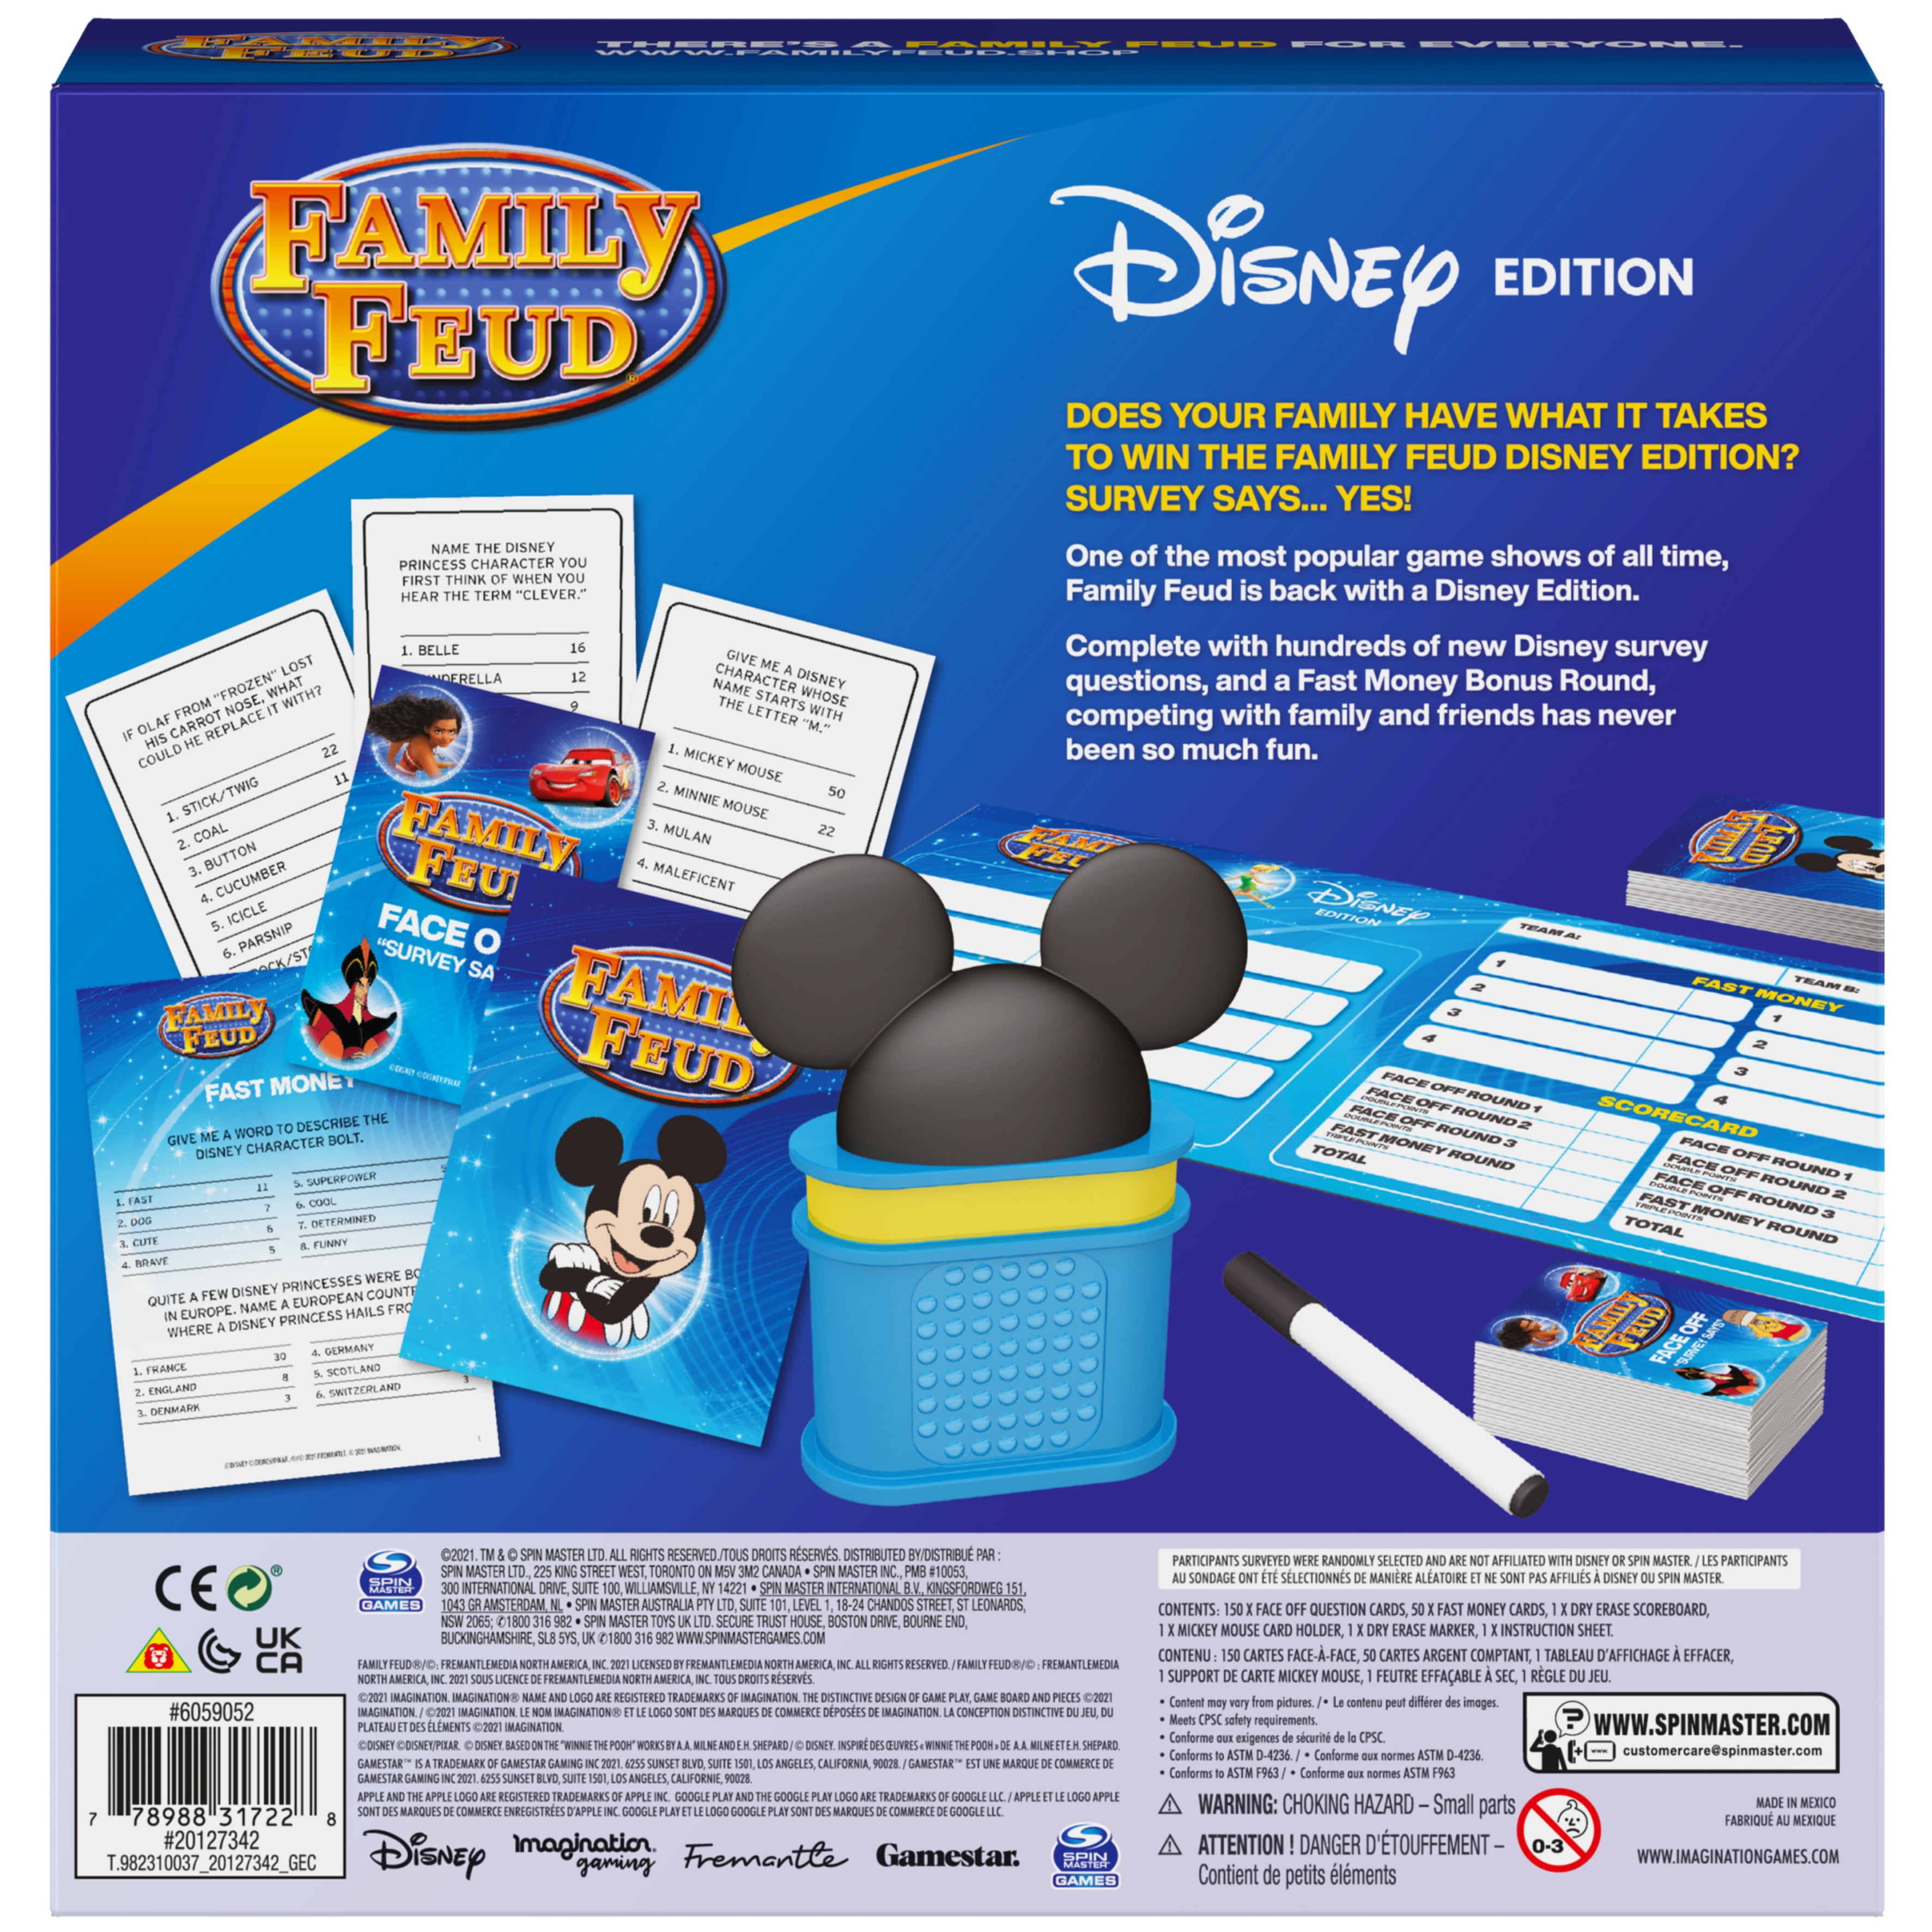 Family Feud, All-New Platinum Edition Game, for Kids Ages 8 and up